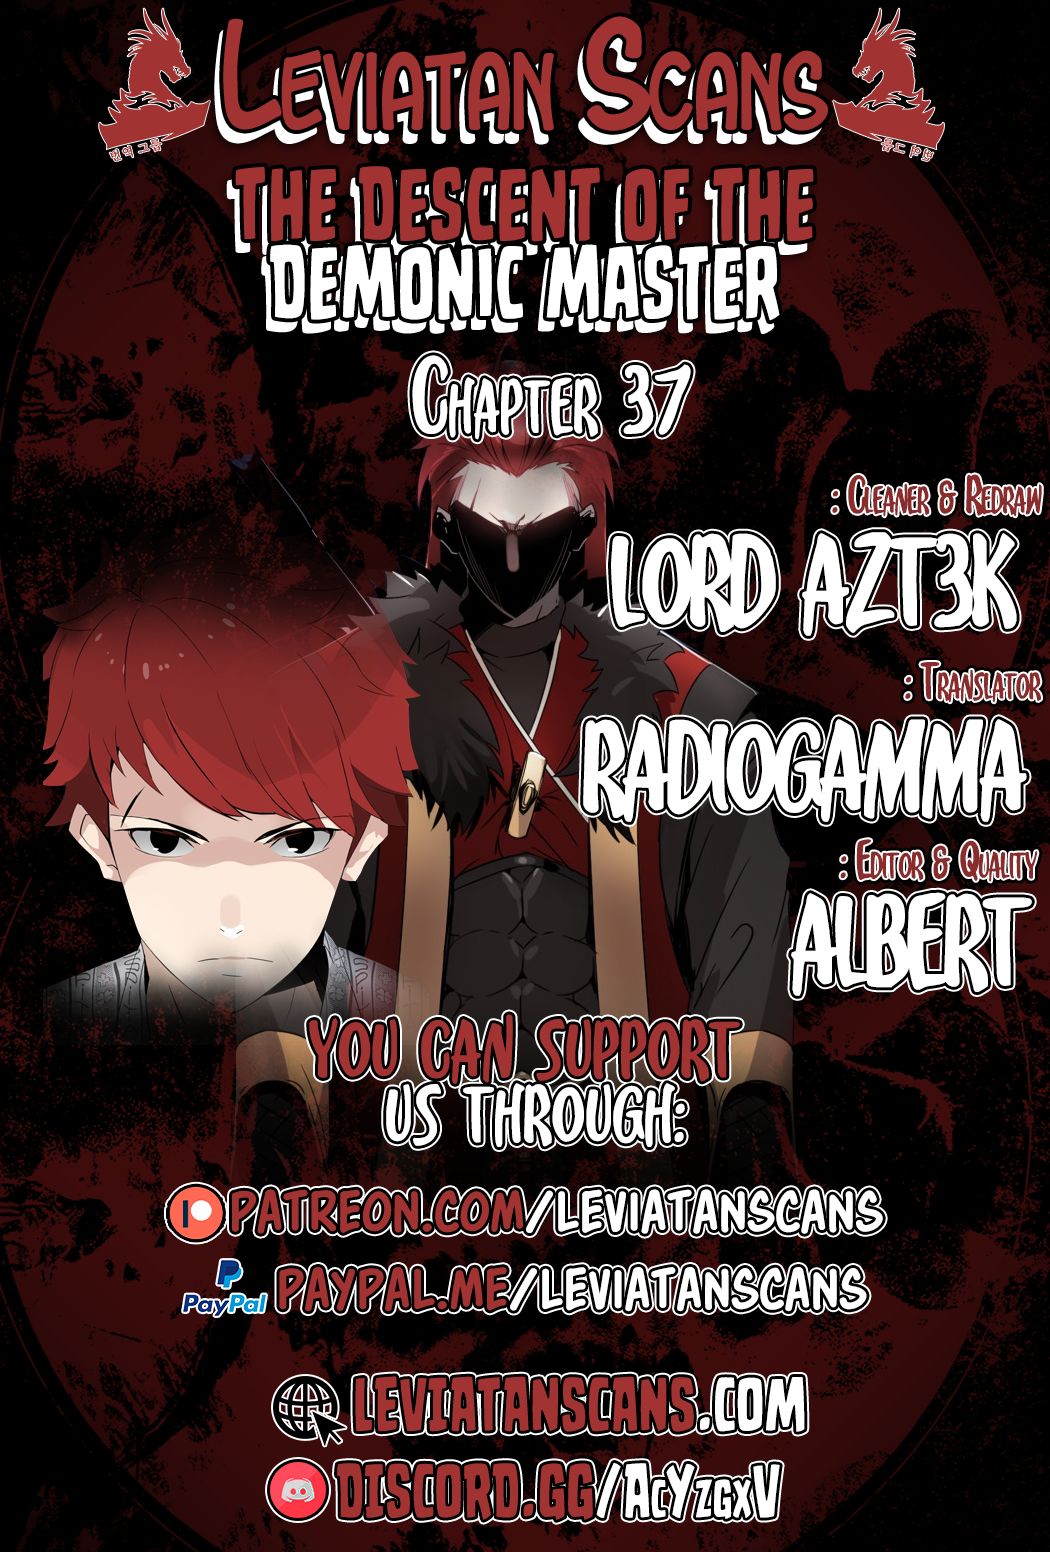 The Descent Of The Demonic Master Chapter 37